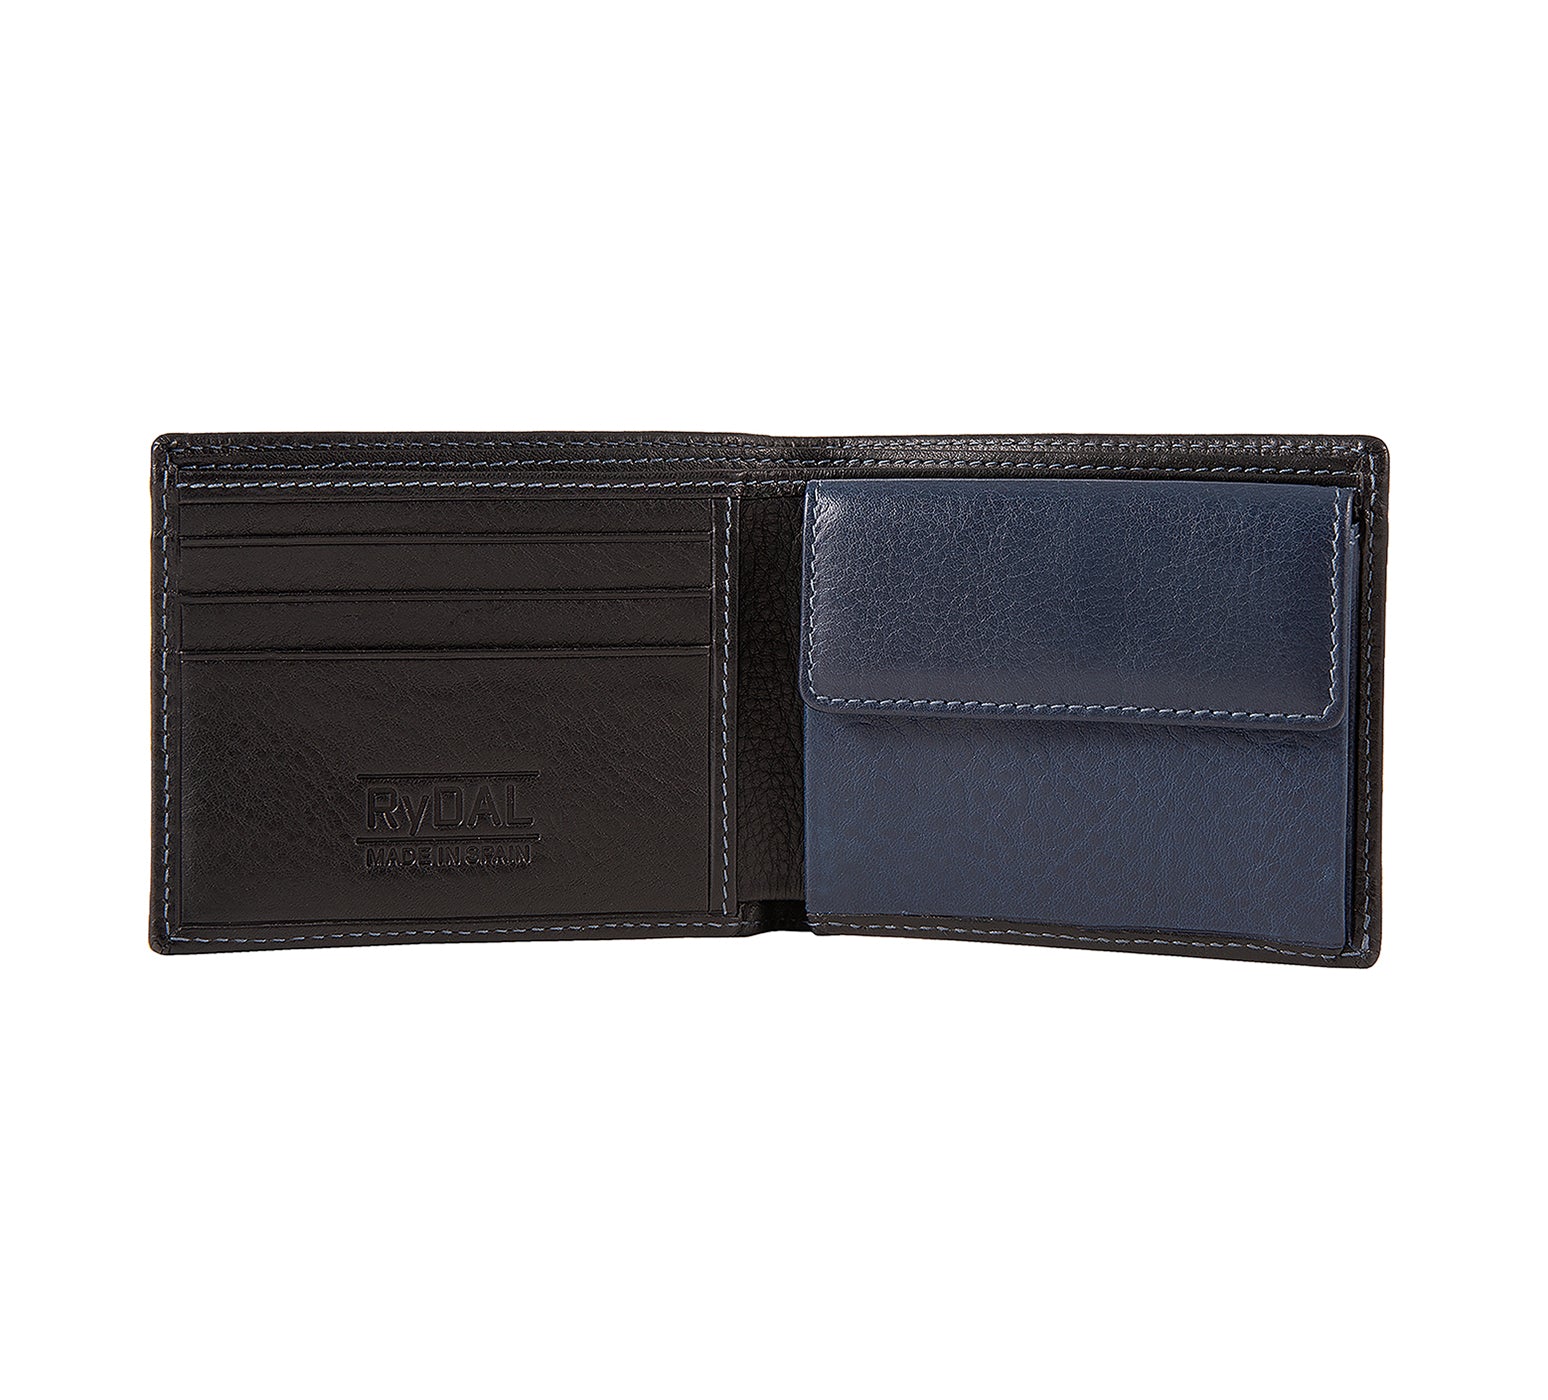 Mens Leather Wallet with Coin Pocket from Rydal in 'Black/Royal Blue' showing interior.